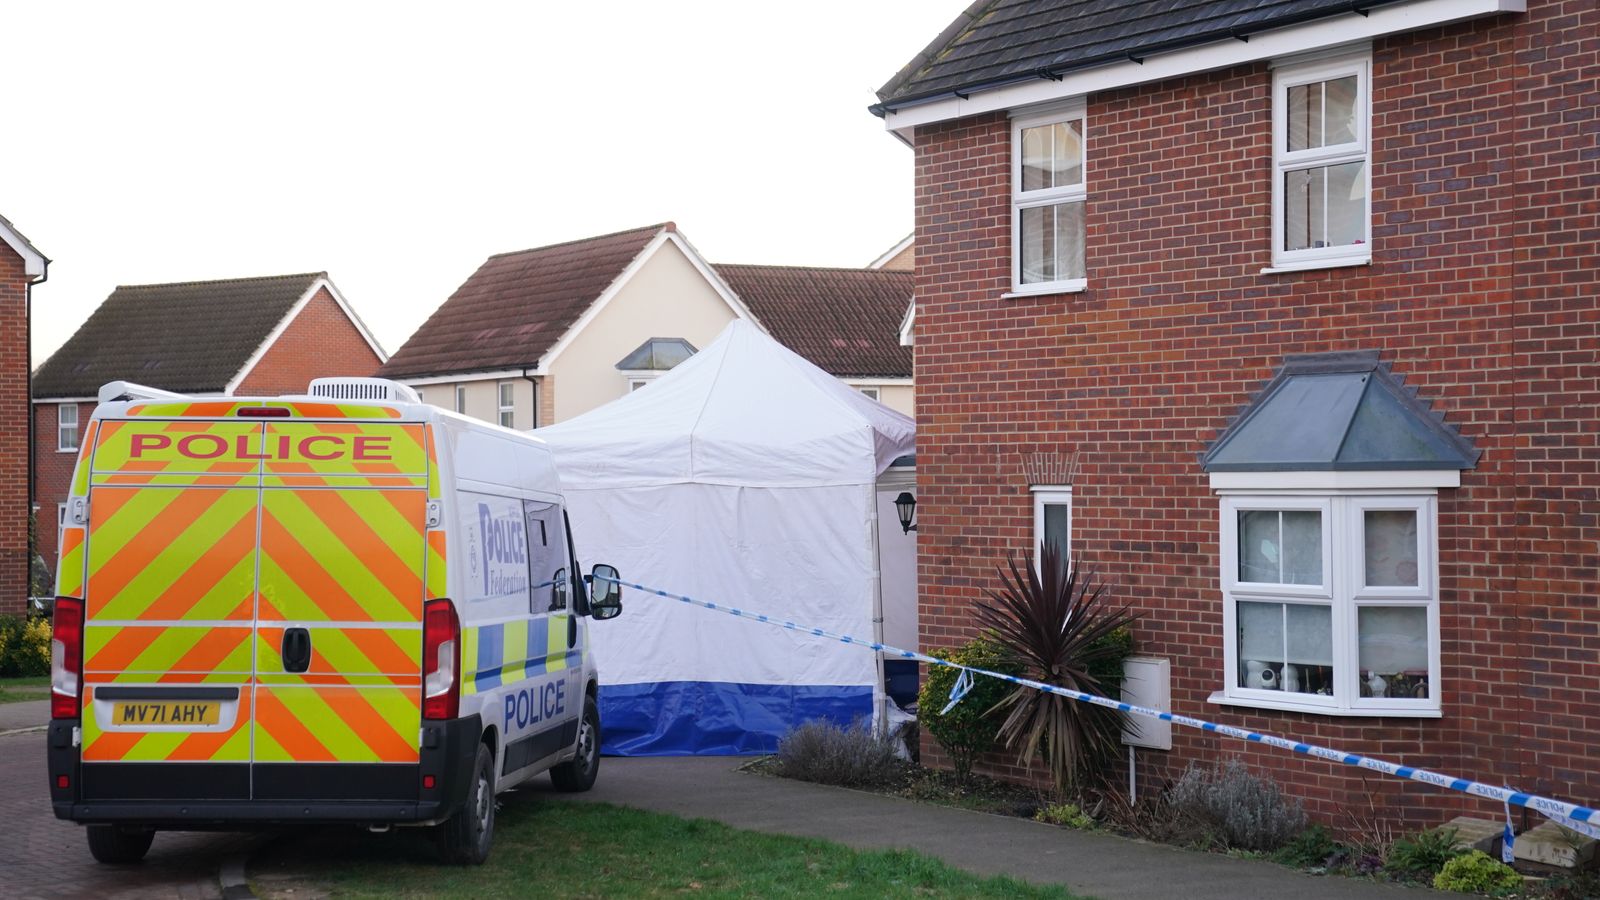 All four family members found dead in Norfolk house had injuries, police say